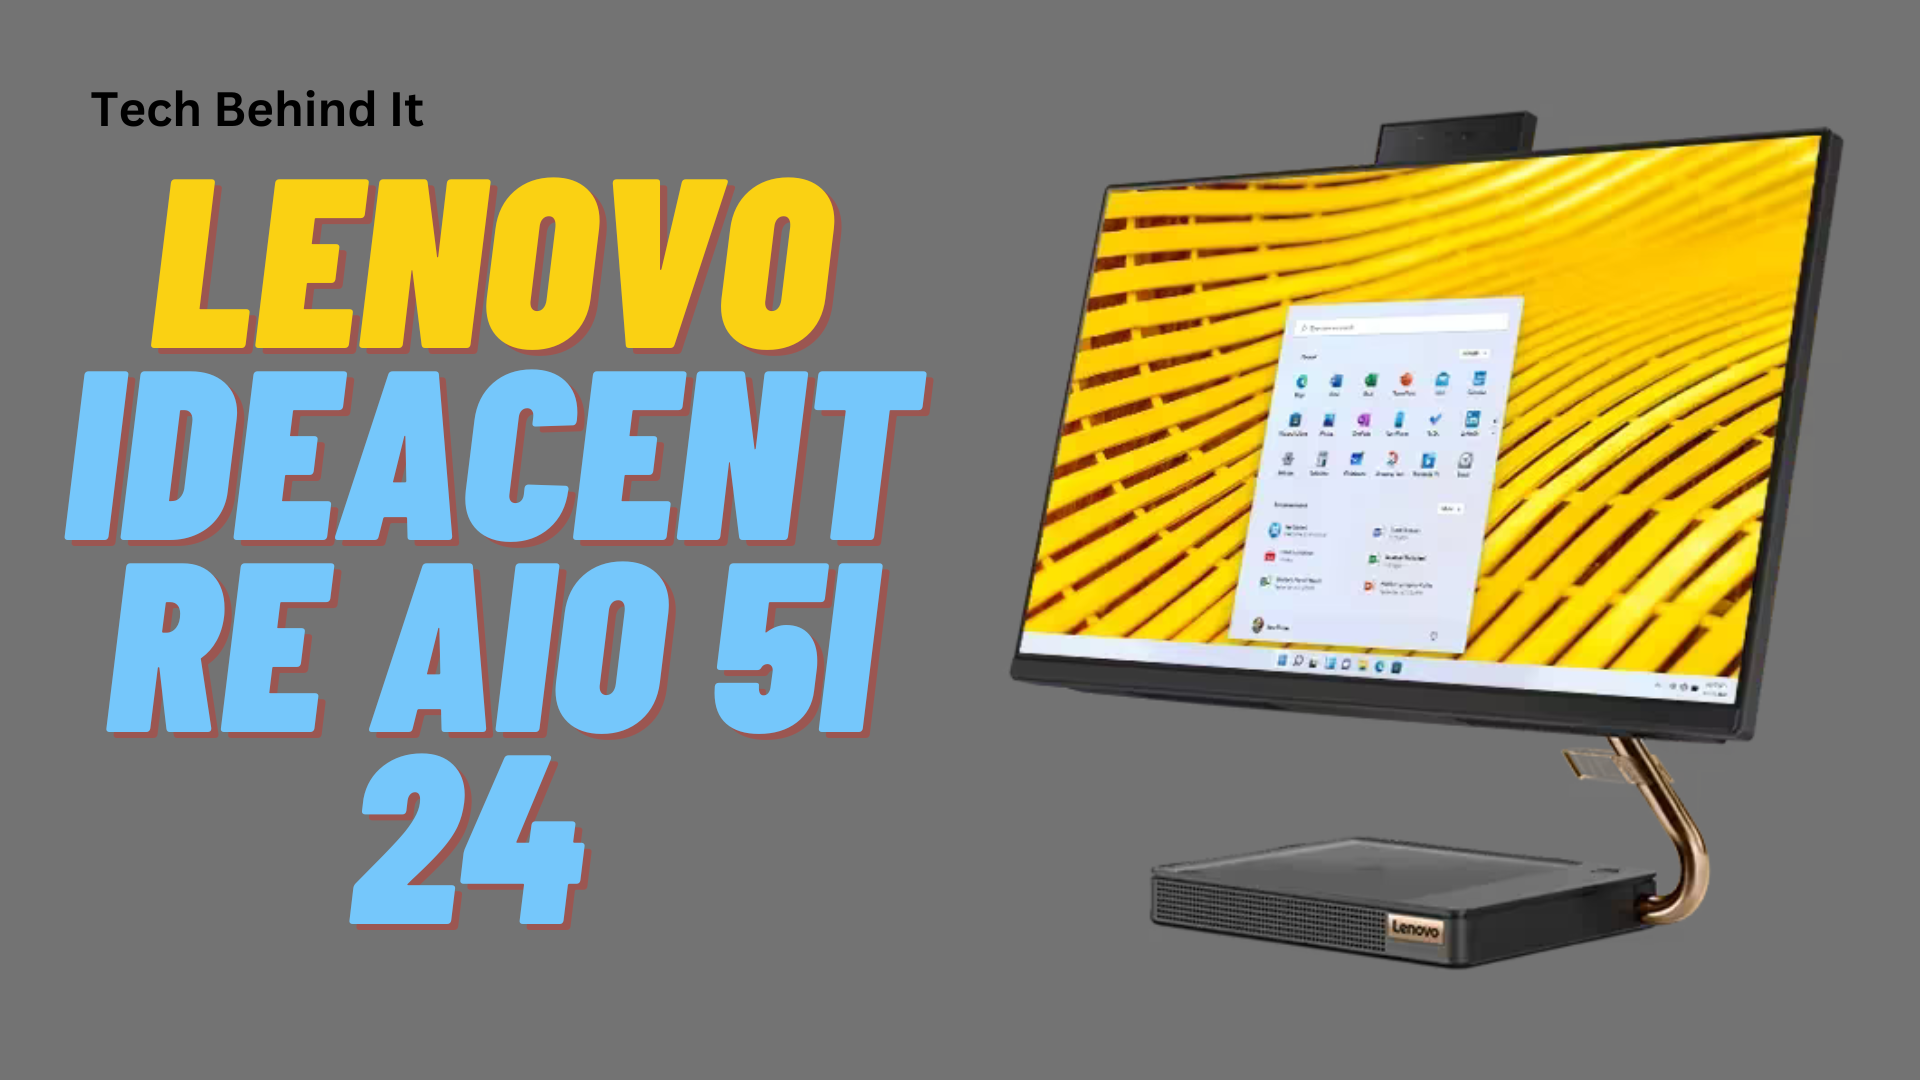 Lenovo IdeaCentre AIO 5i 24: An All-in-one With Plenty Of Style